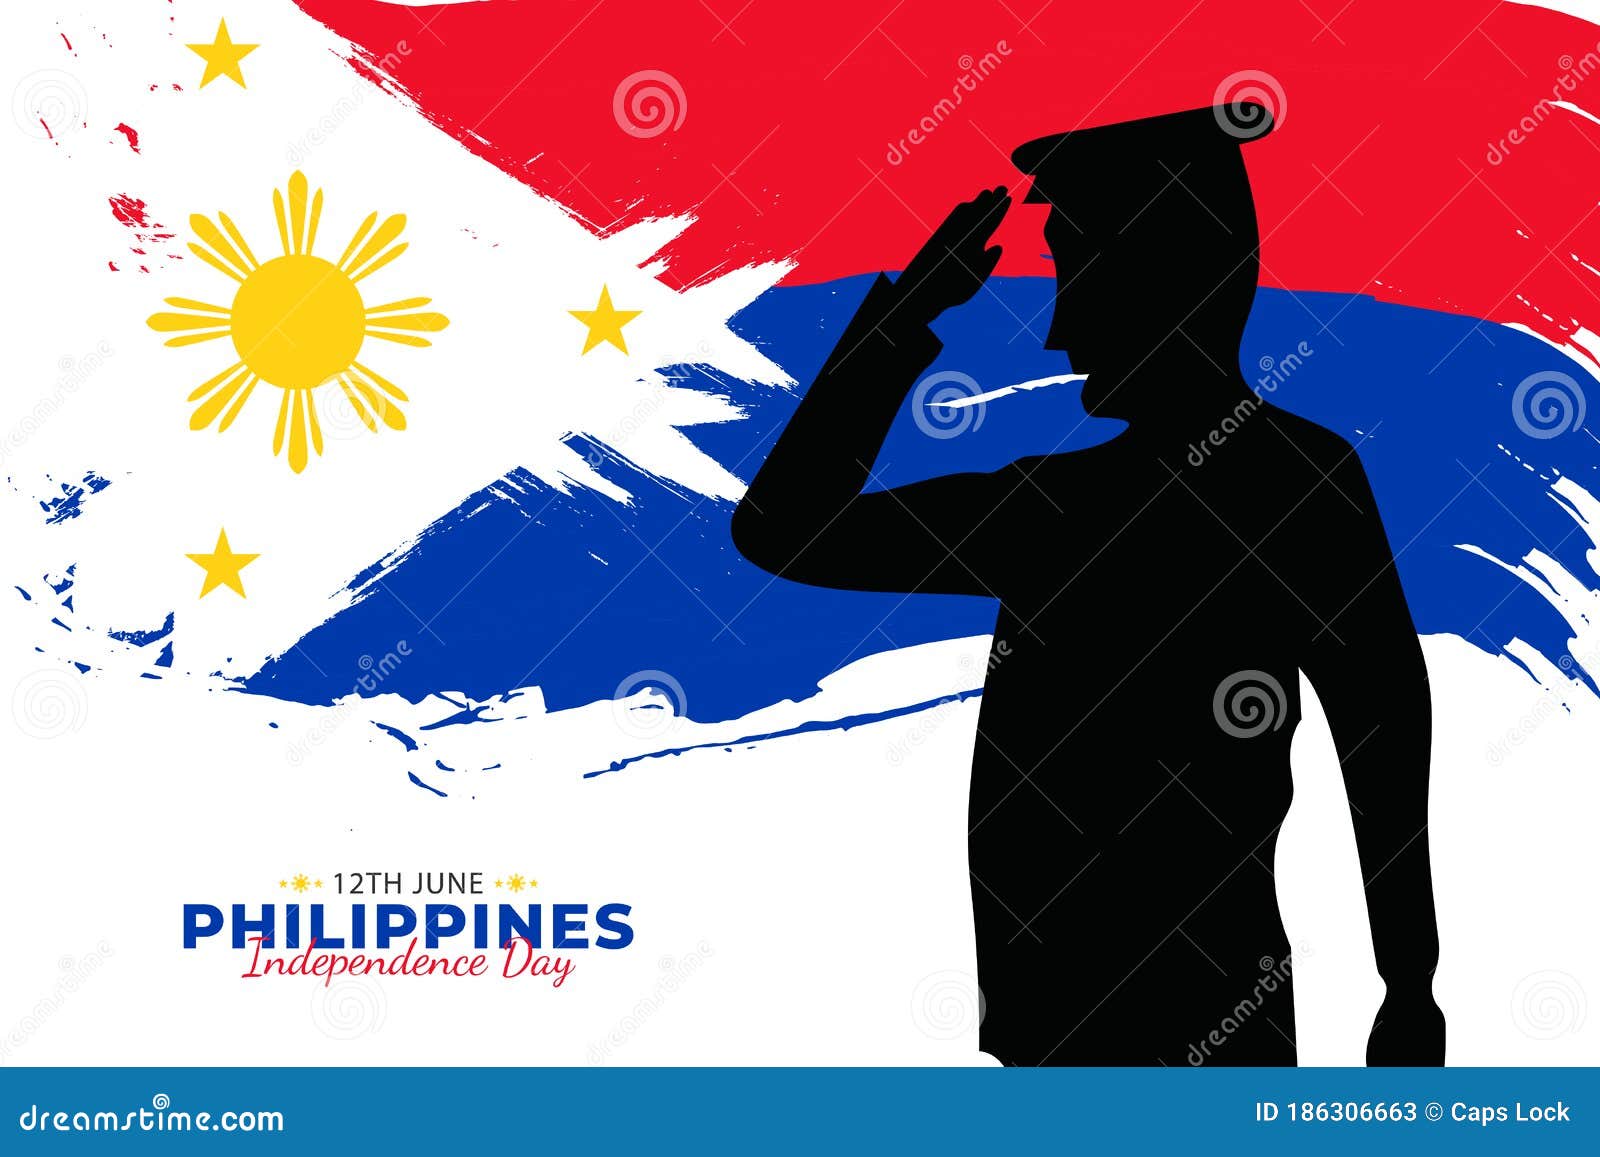 Philippine Independence Day Celebrated Annually On June 12 In Philippine Happy National Holiday Of Freedom Patriotic Poster Stock Vector Illustration Of Araw Flag